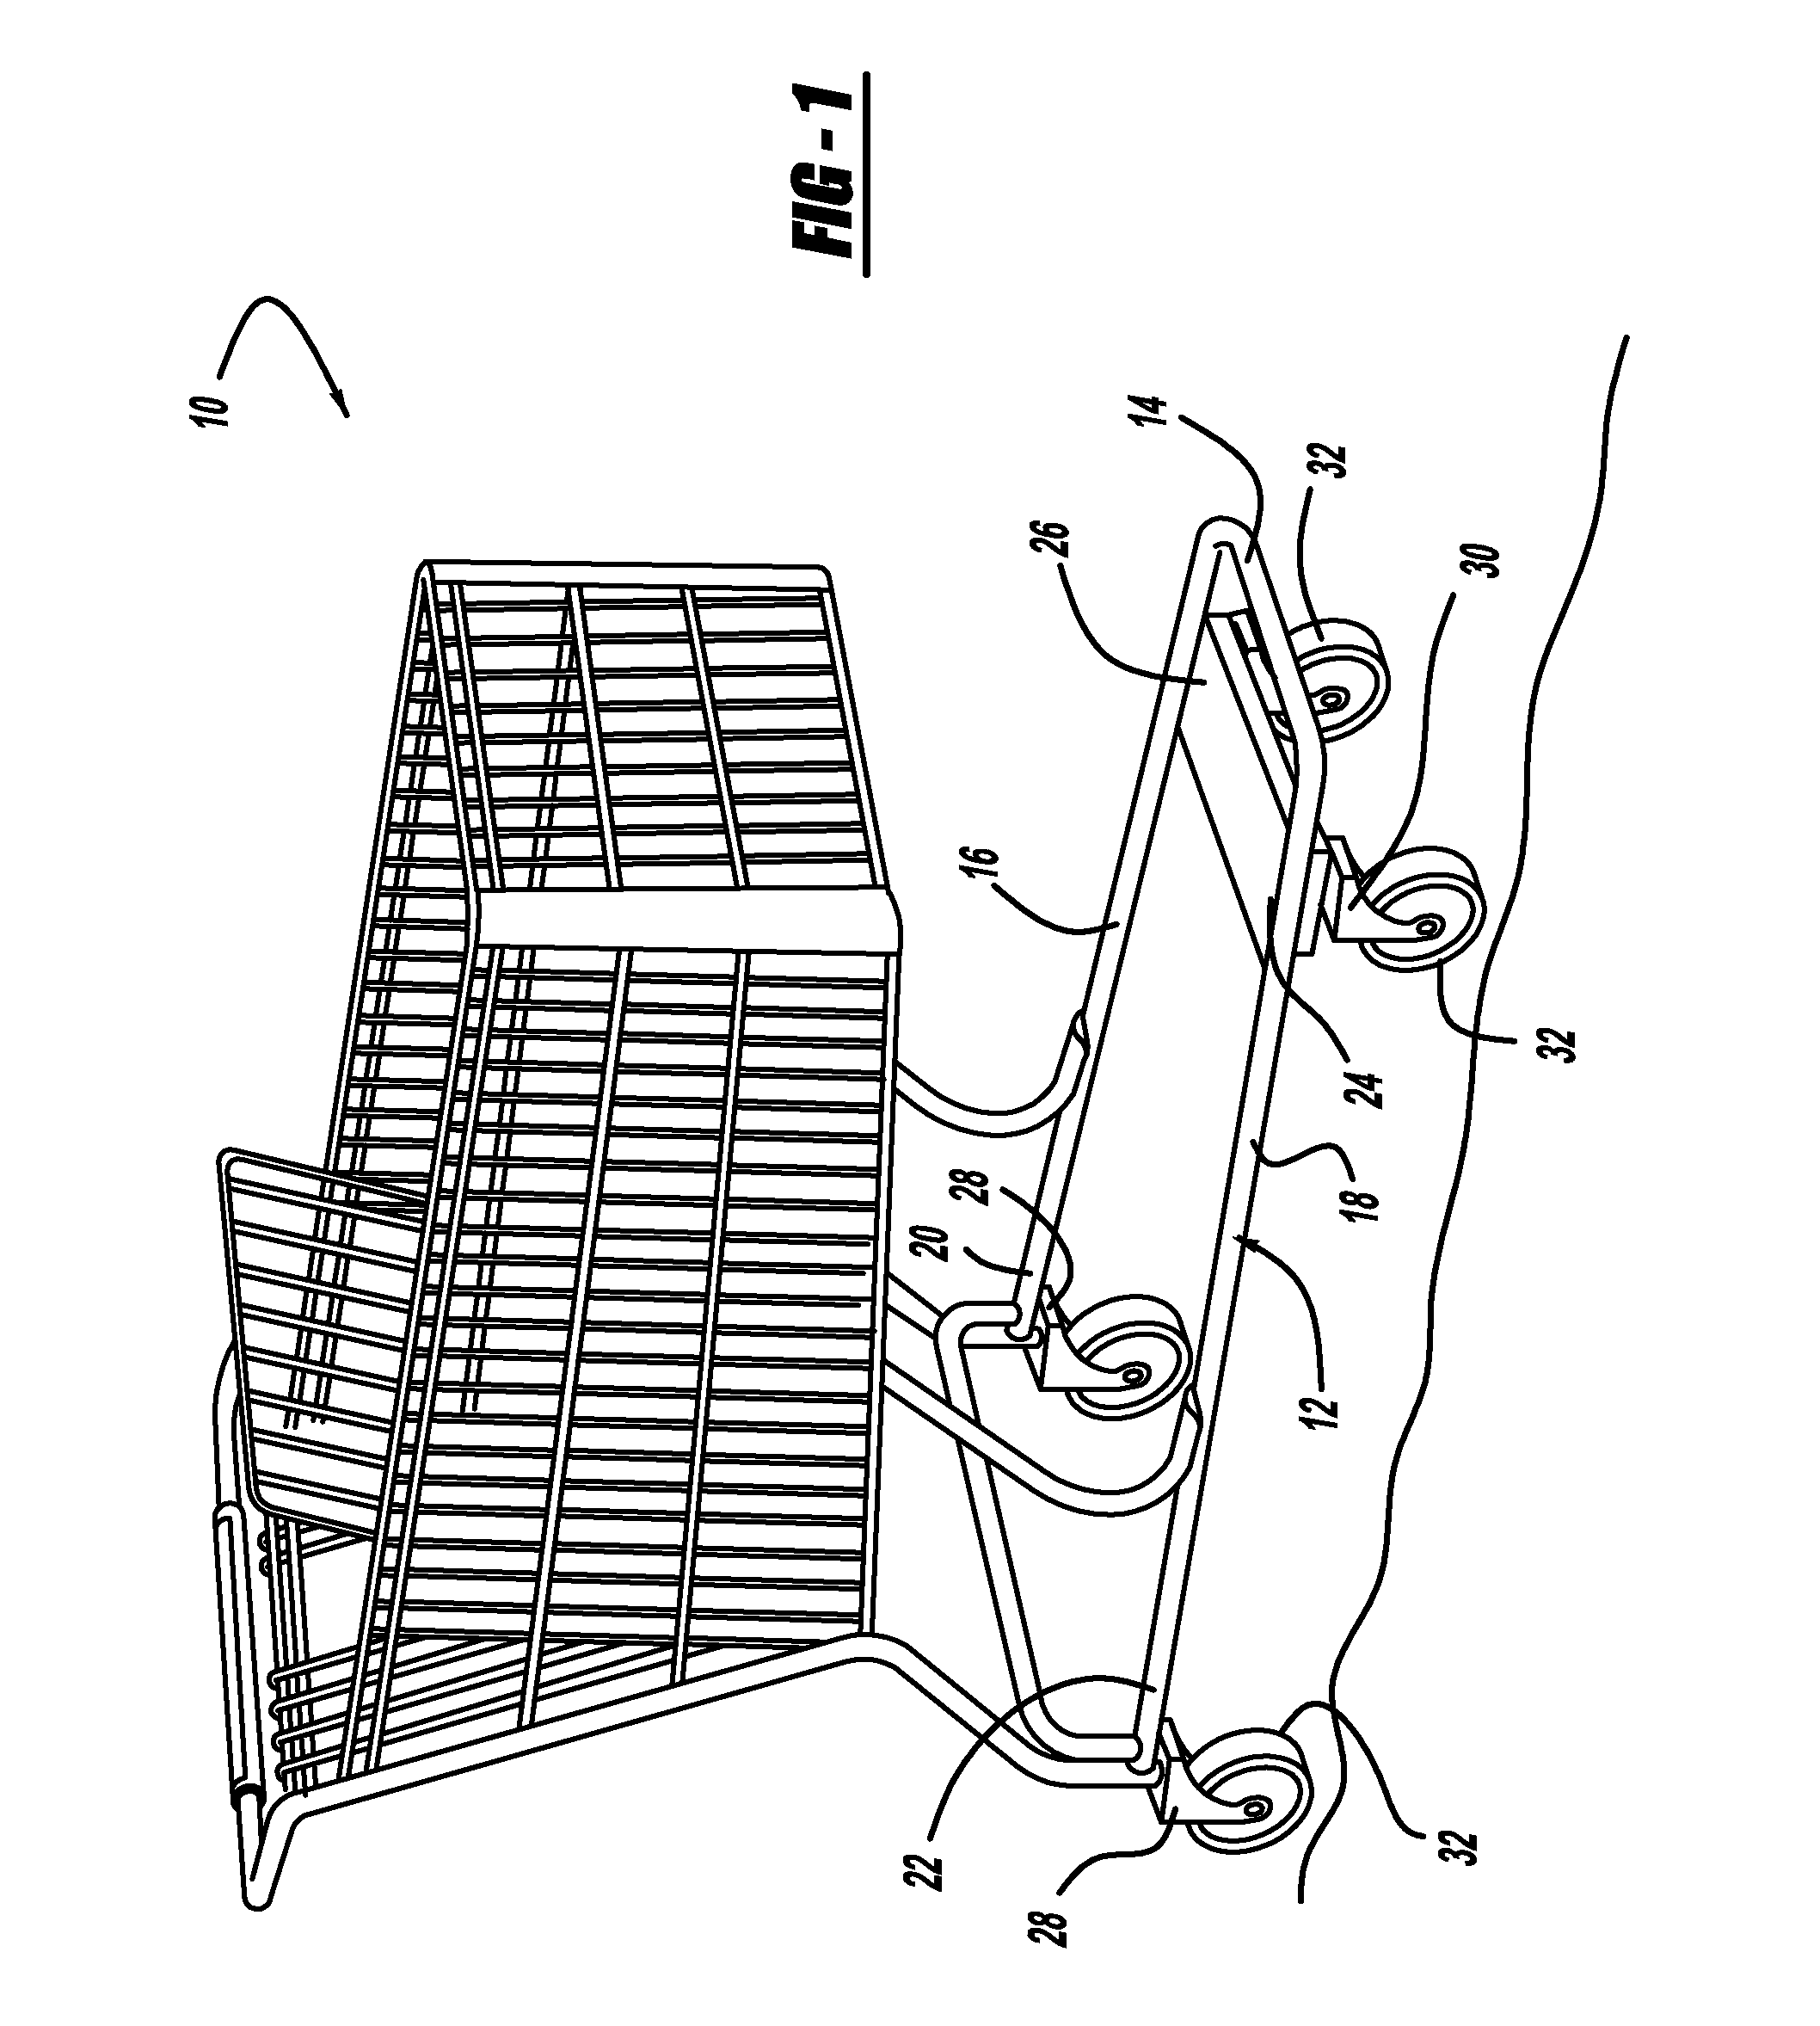 Security device and method for inhibiting the unauthorized removal of a transport vehicle from a designated use area